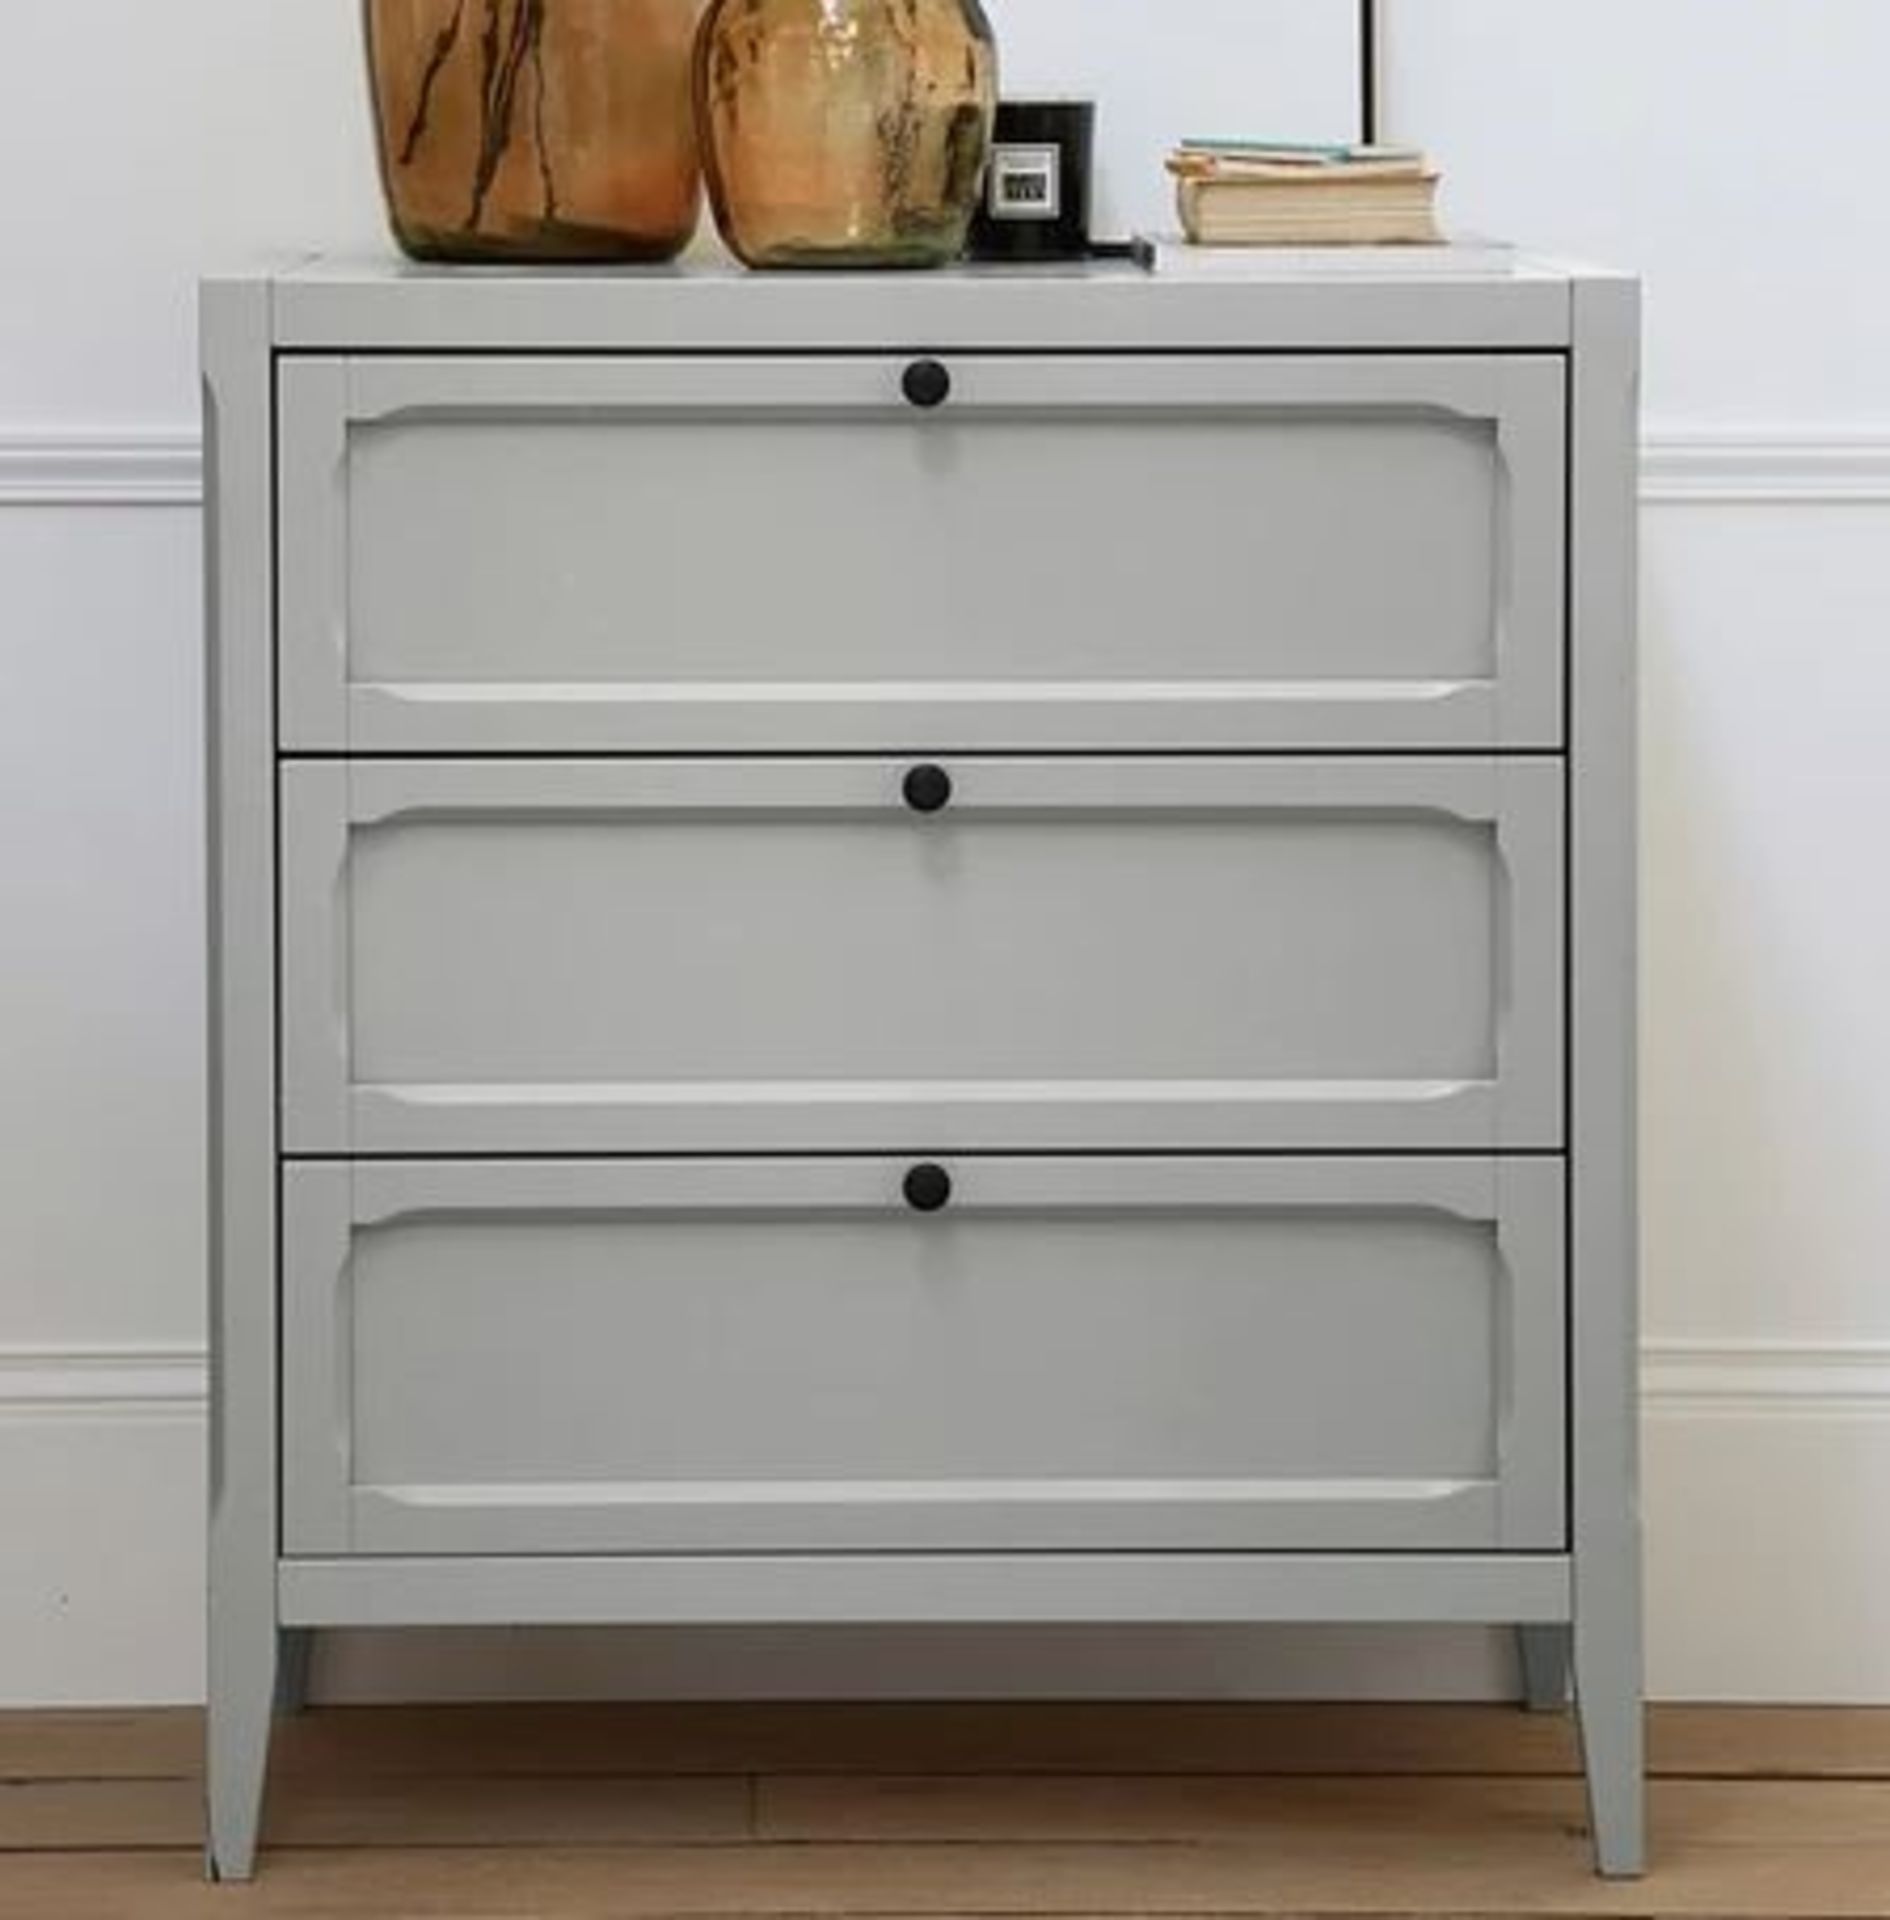 LA REDOUTE EUGENIE CHEST OF 3 DRAWERS